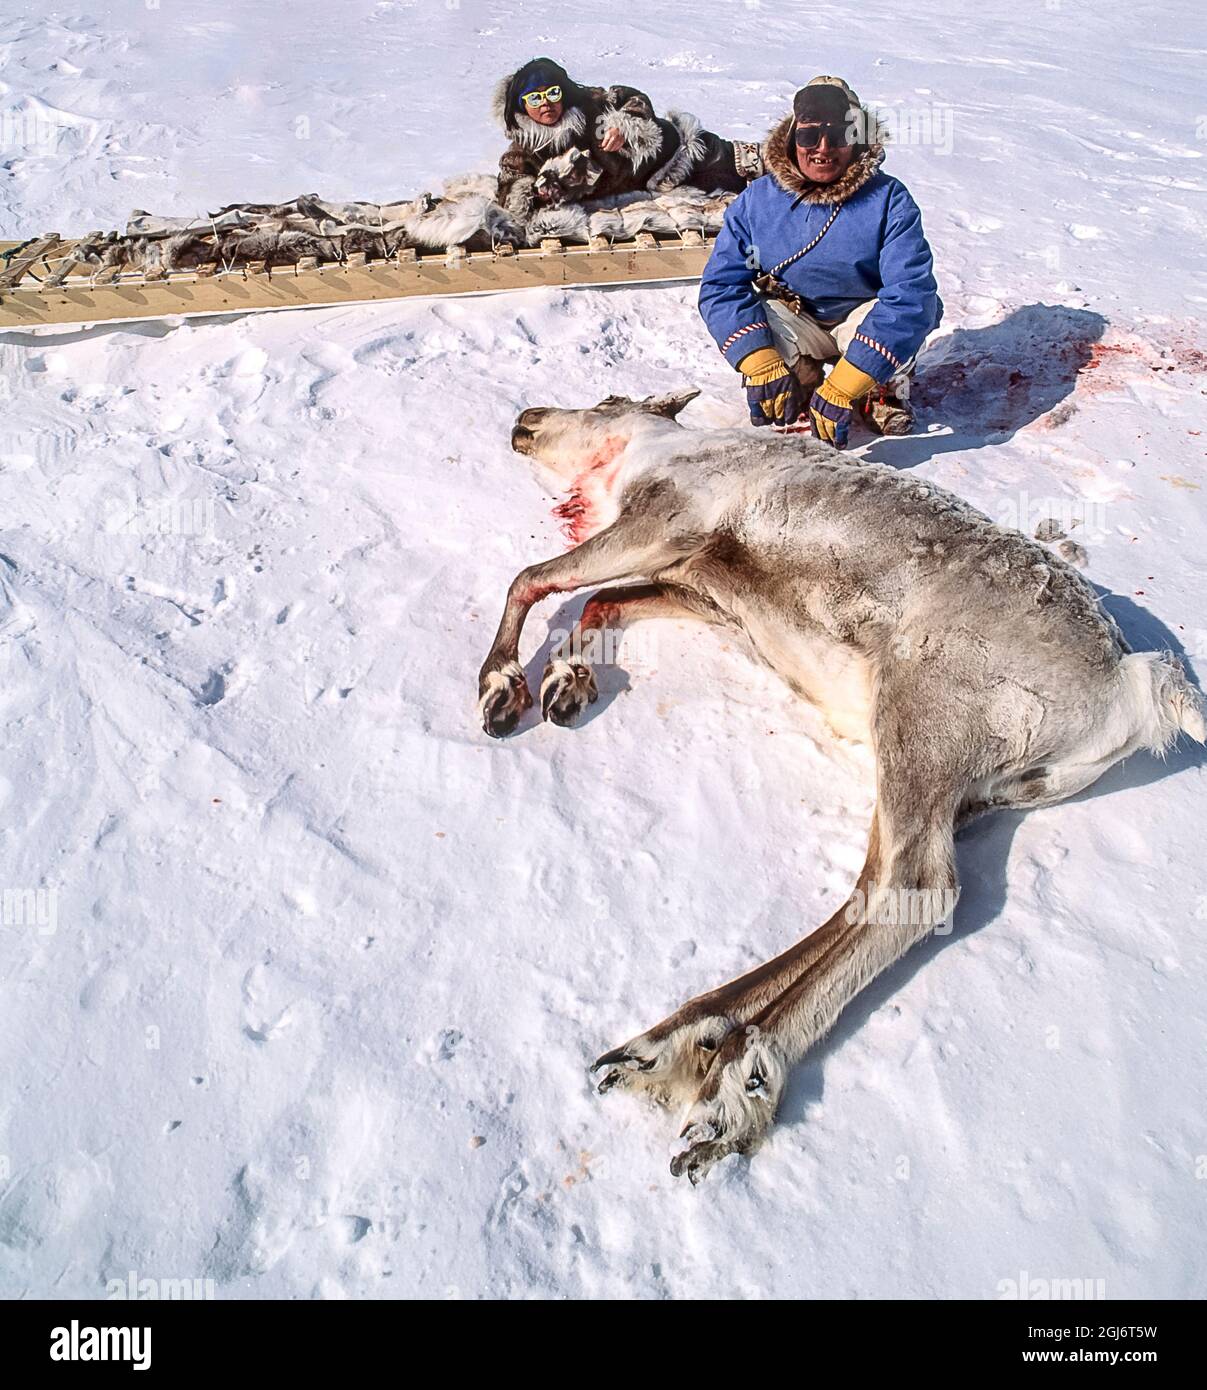 Baker Lake, Nunavut, Canada. Inuit man beside freshly hunted caribou. Girl, 11, dressed in traditional skin clothing, is on traditional cargo sled beh Stock Photo